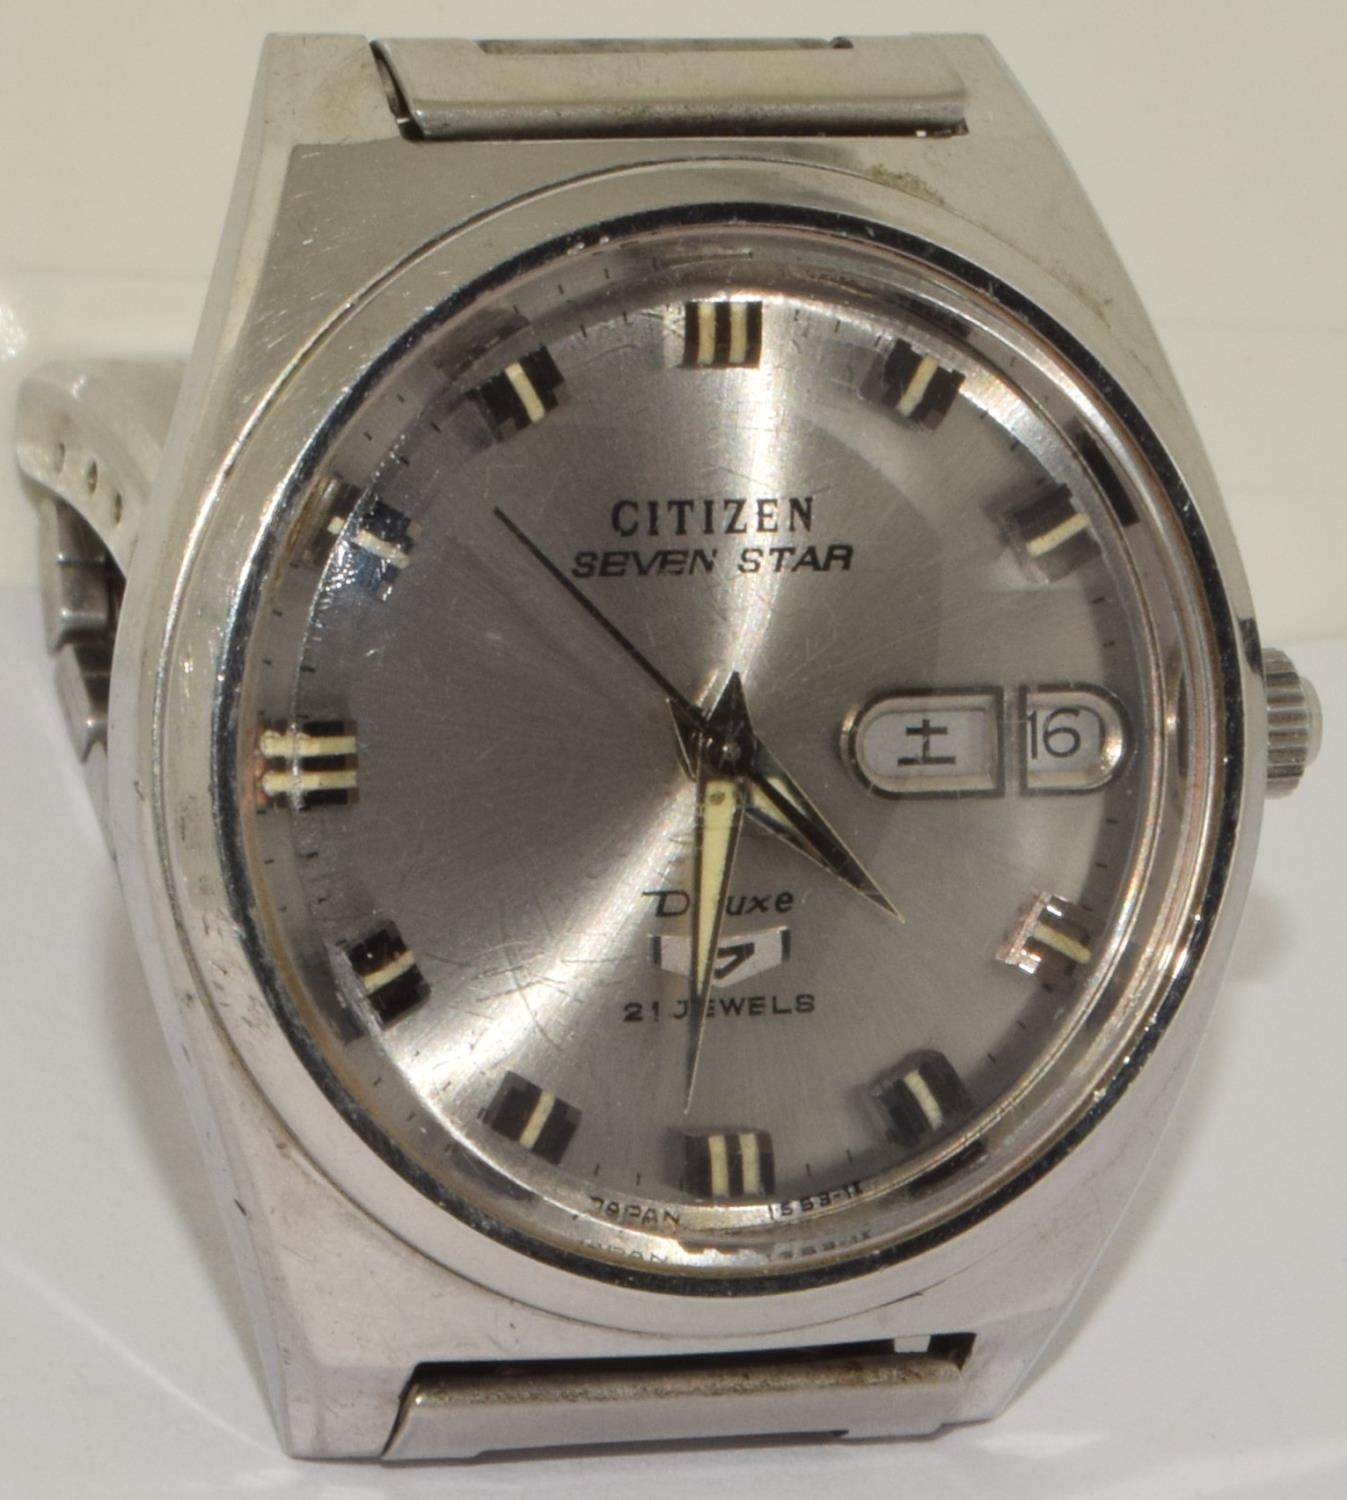 Vintage Citizen 7 star Deluxe 21 jewel automatic watch on stainless steel strap. JDM model with - Image 6 of 7